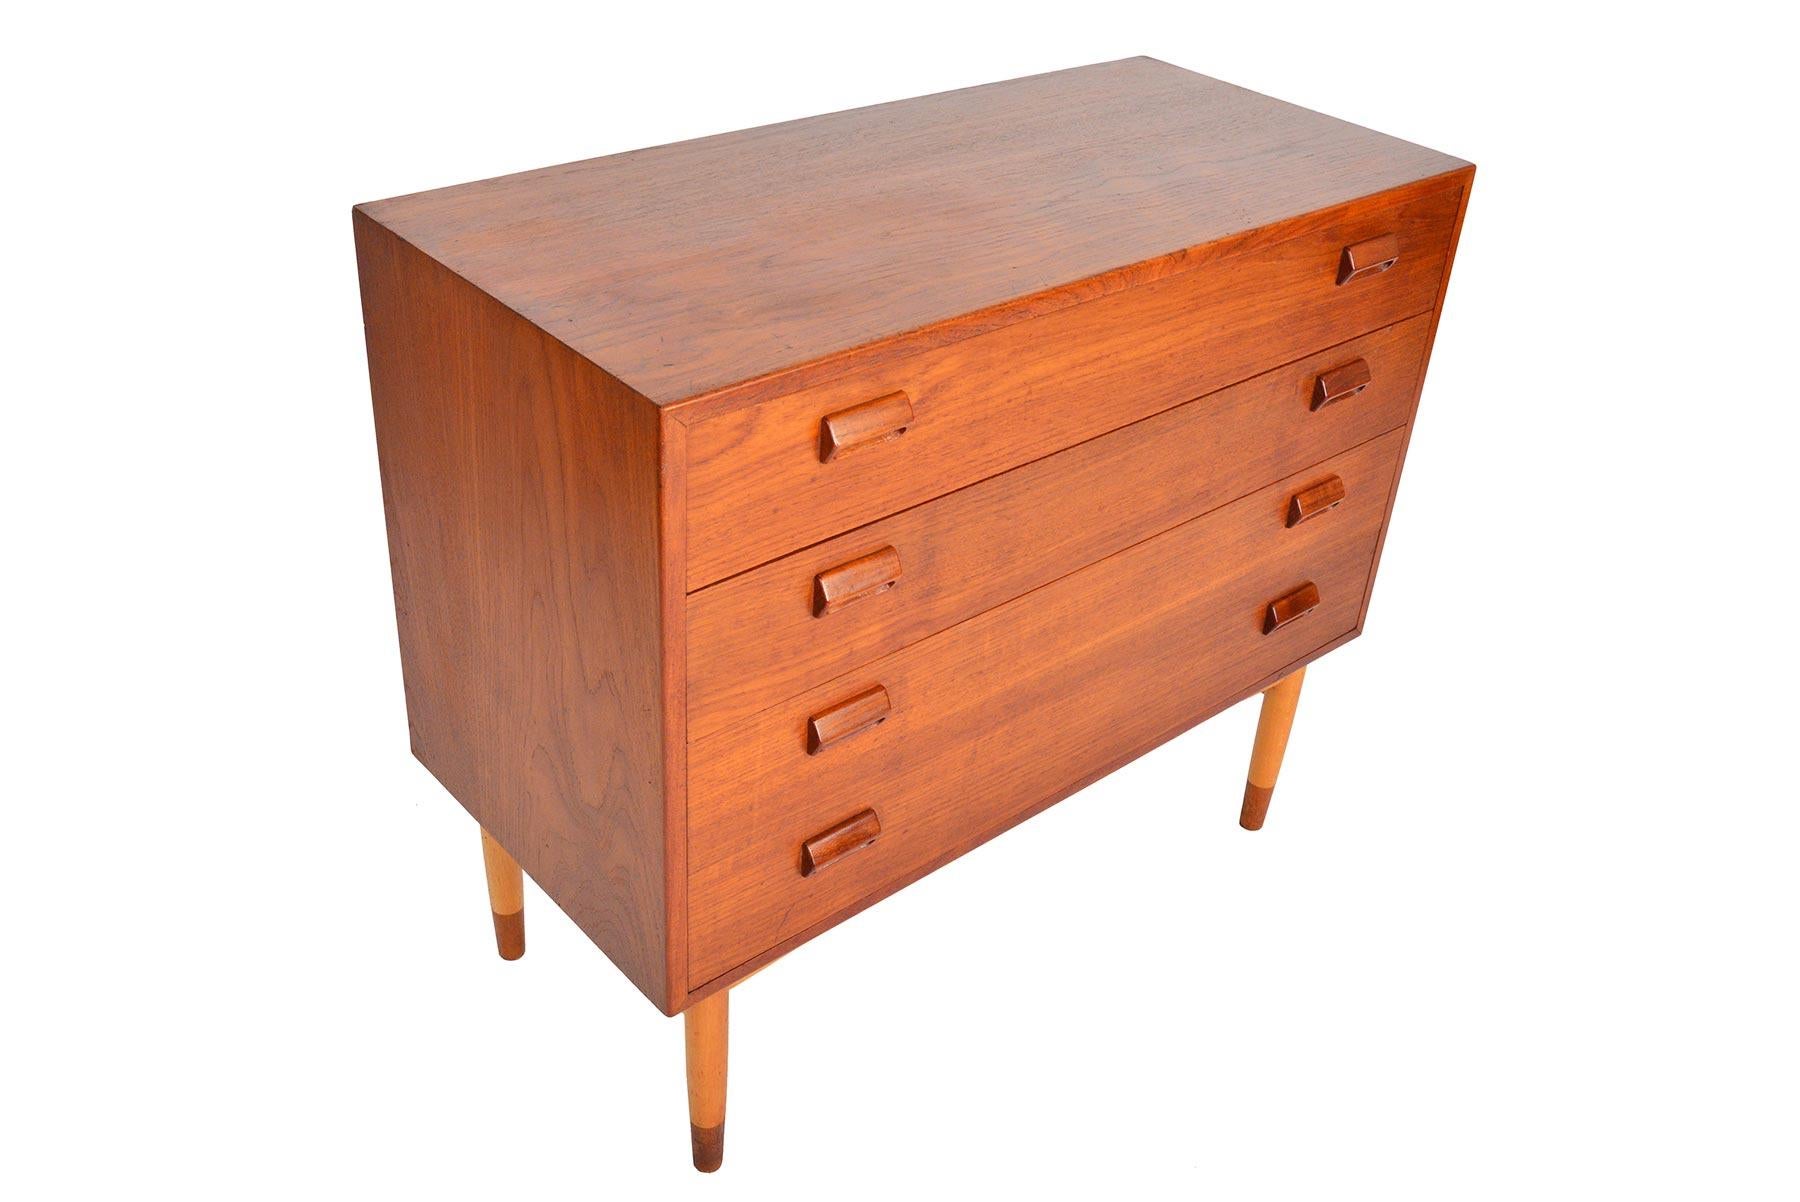 This beautiful gentleman’s chest was designed by Børge Mogensen for Søborg Møbelfabrik in 1951. The case is expertly crafted in teak and stands on a solid oak base with teak end caps. Each drawer front is adorned with the designer’s signature